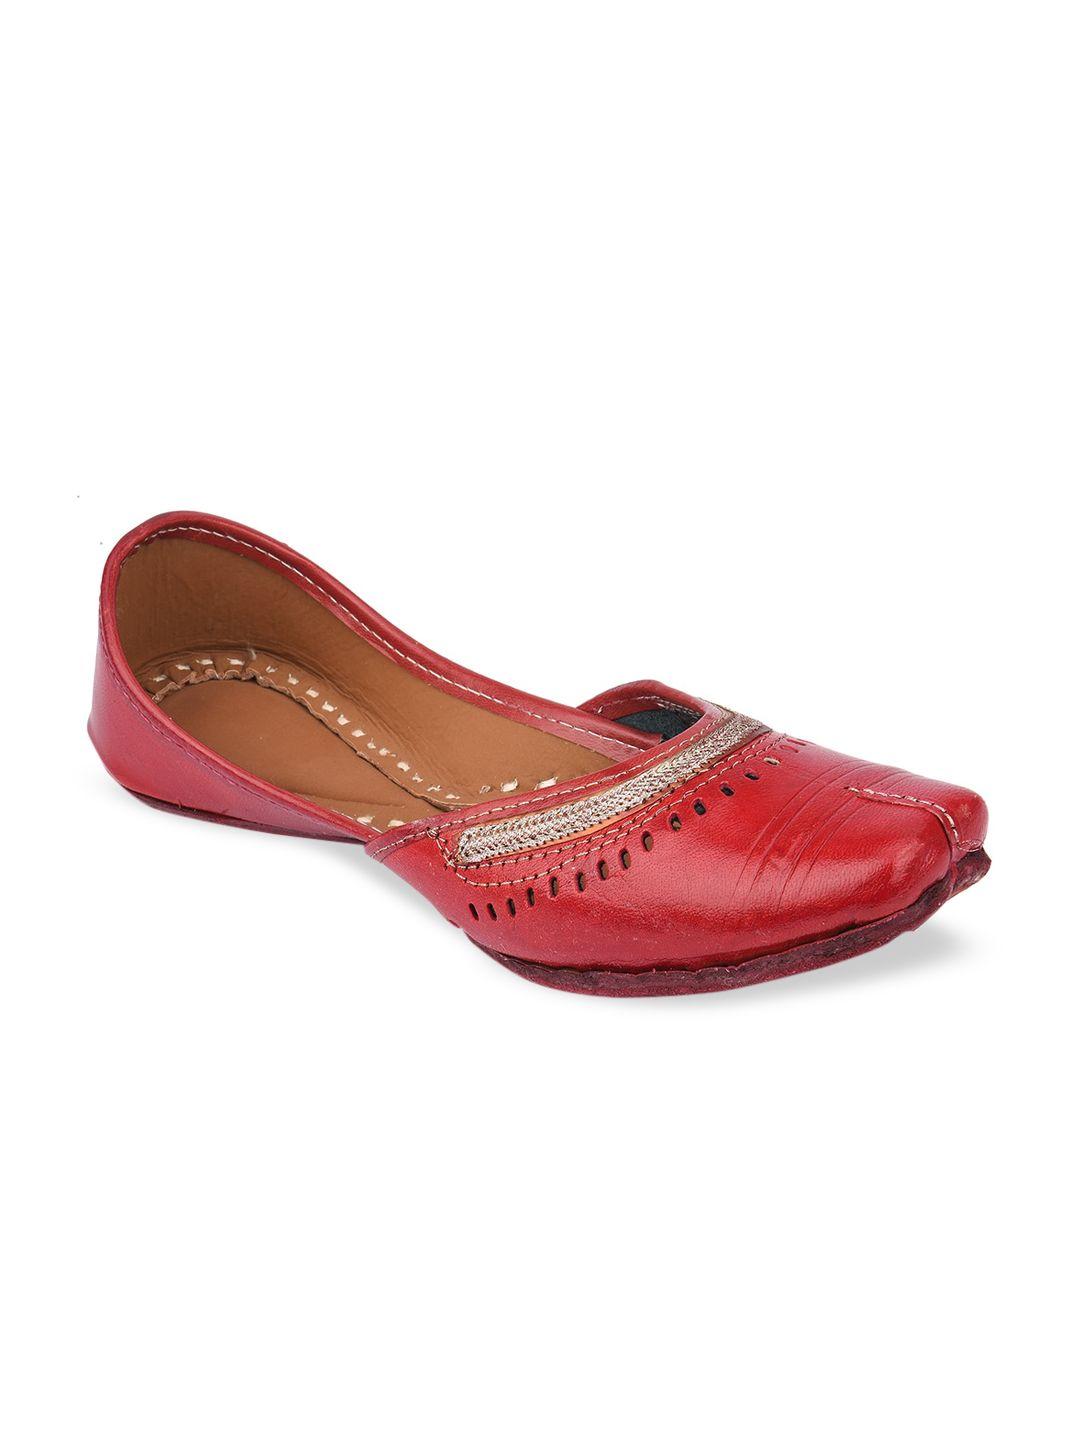 desi-colour-women-red-embellished-mojaris-with-laser-cuts-flats